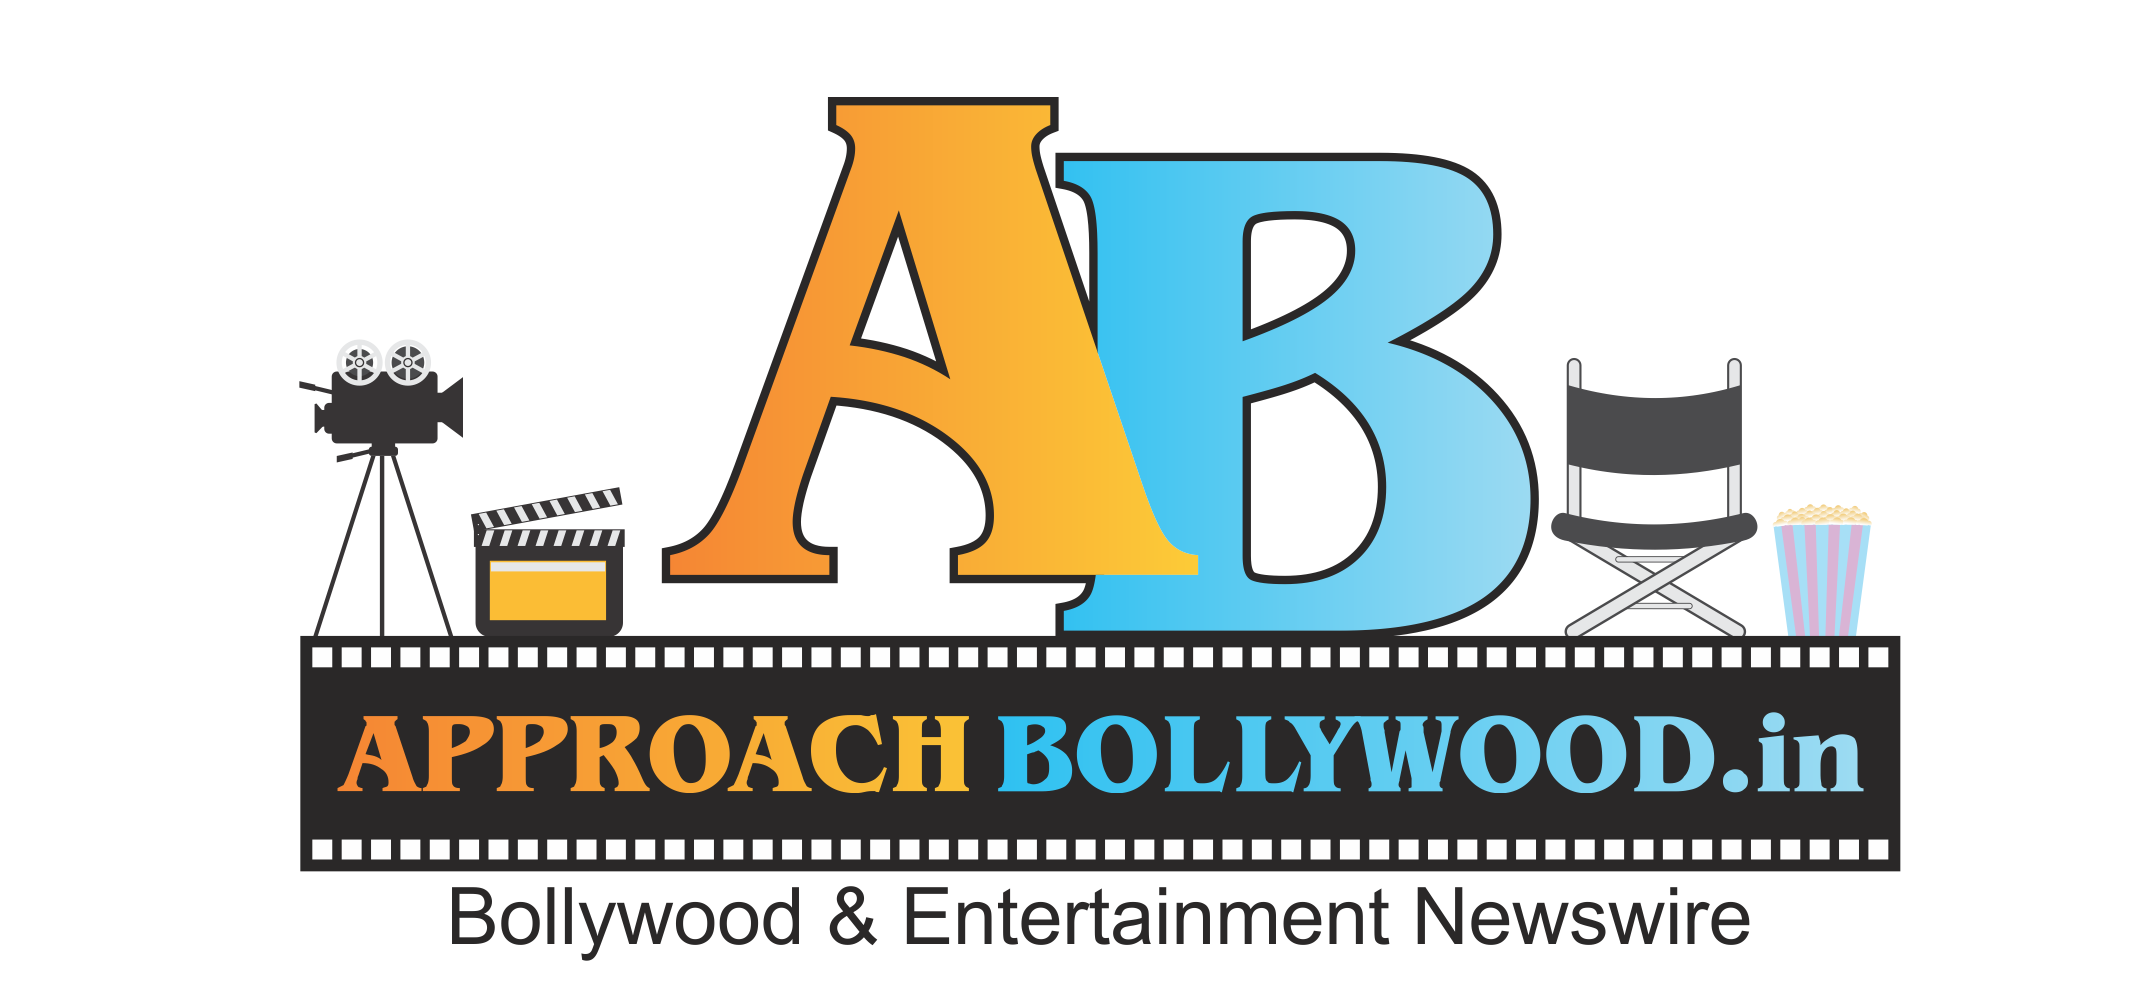 Approach Bollywood is Looking For Journalists / Writers / Reporters experienced with the Hindi Film Industry for the editorial / content team